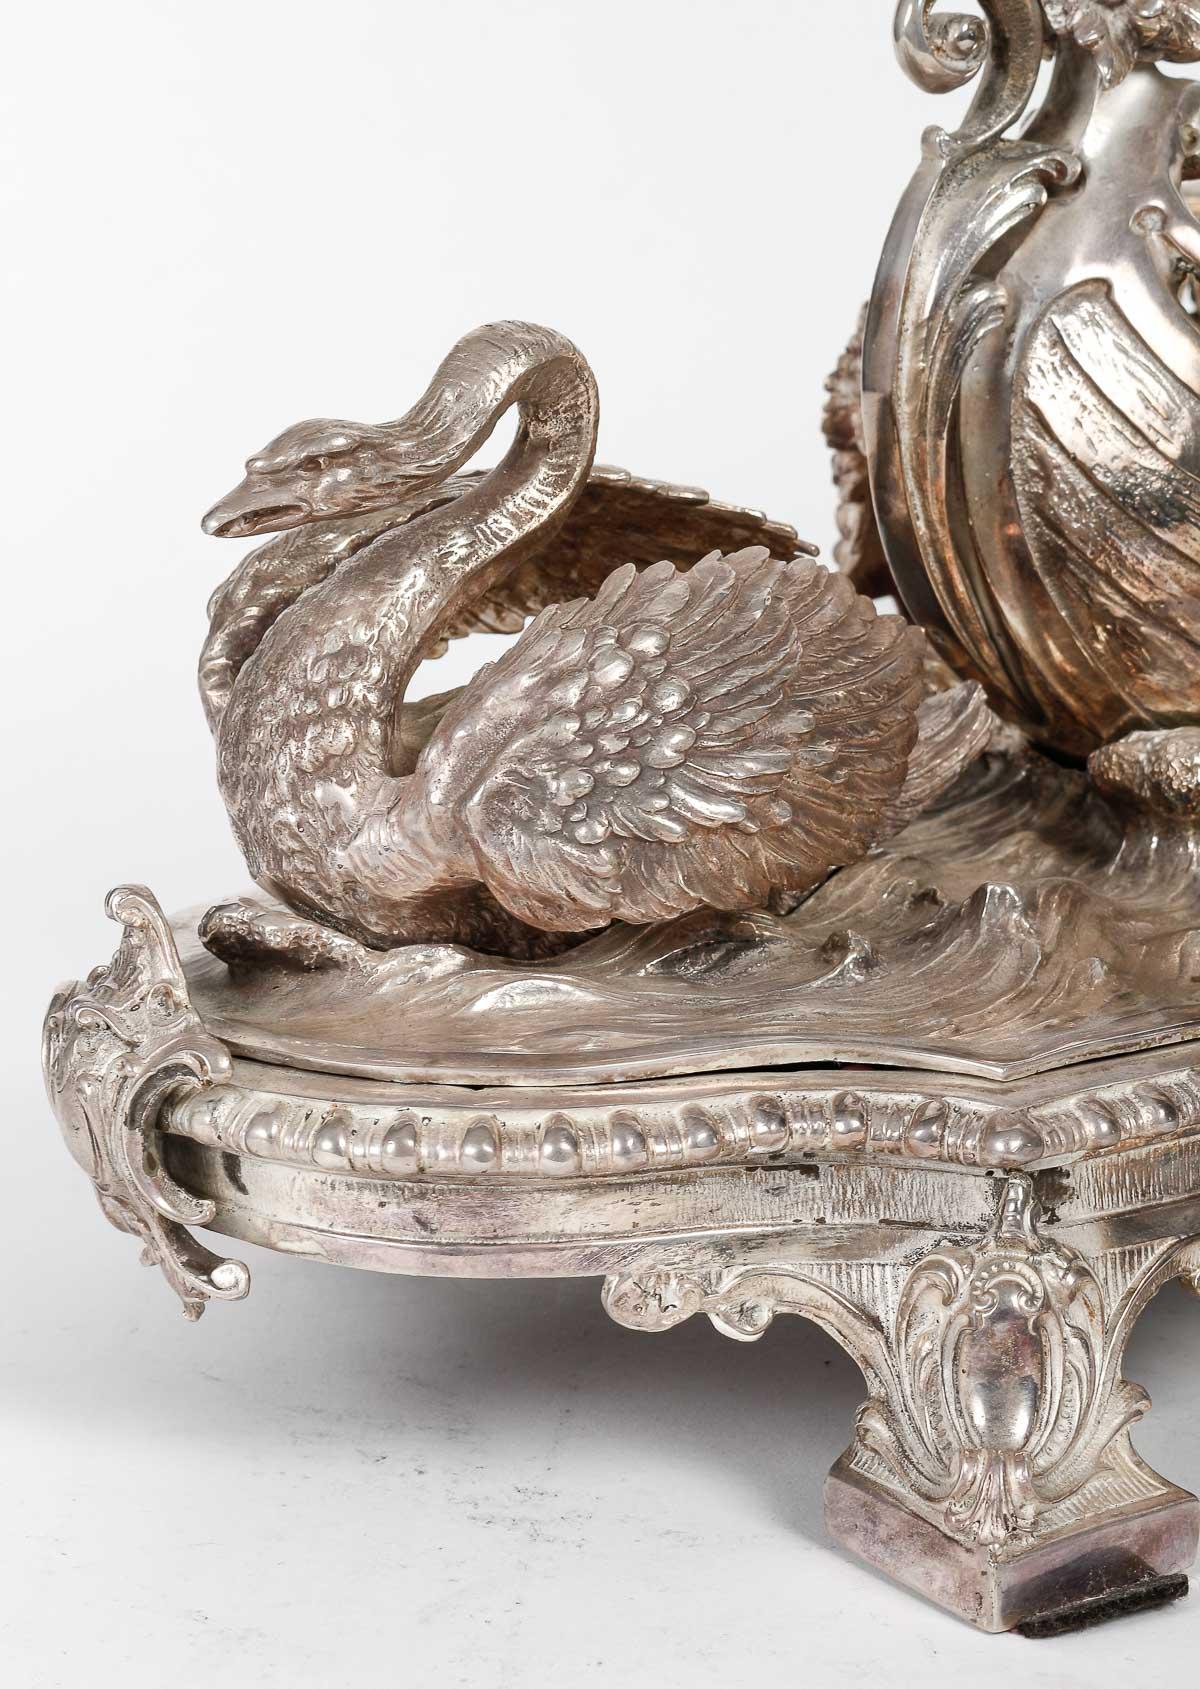 Silver Plated Metal Fruit Bowl, Centerpiece, 19th Century, Napoleon III Period. For Sale 2